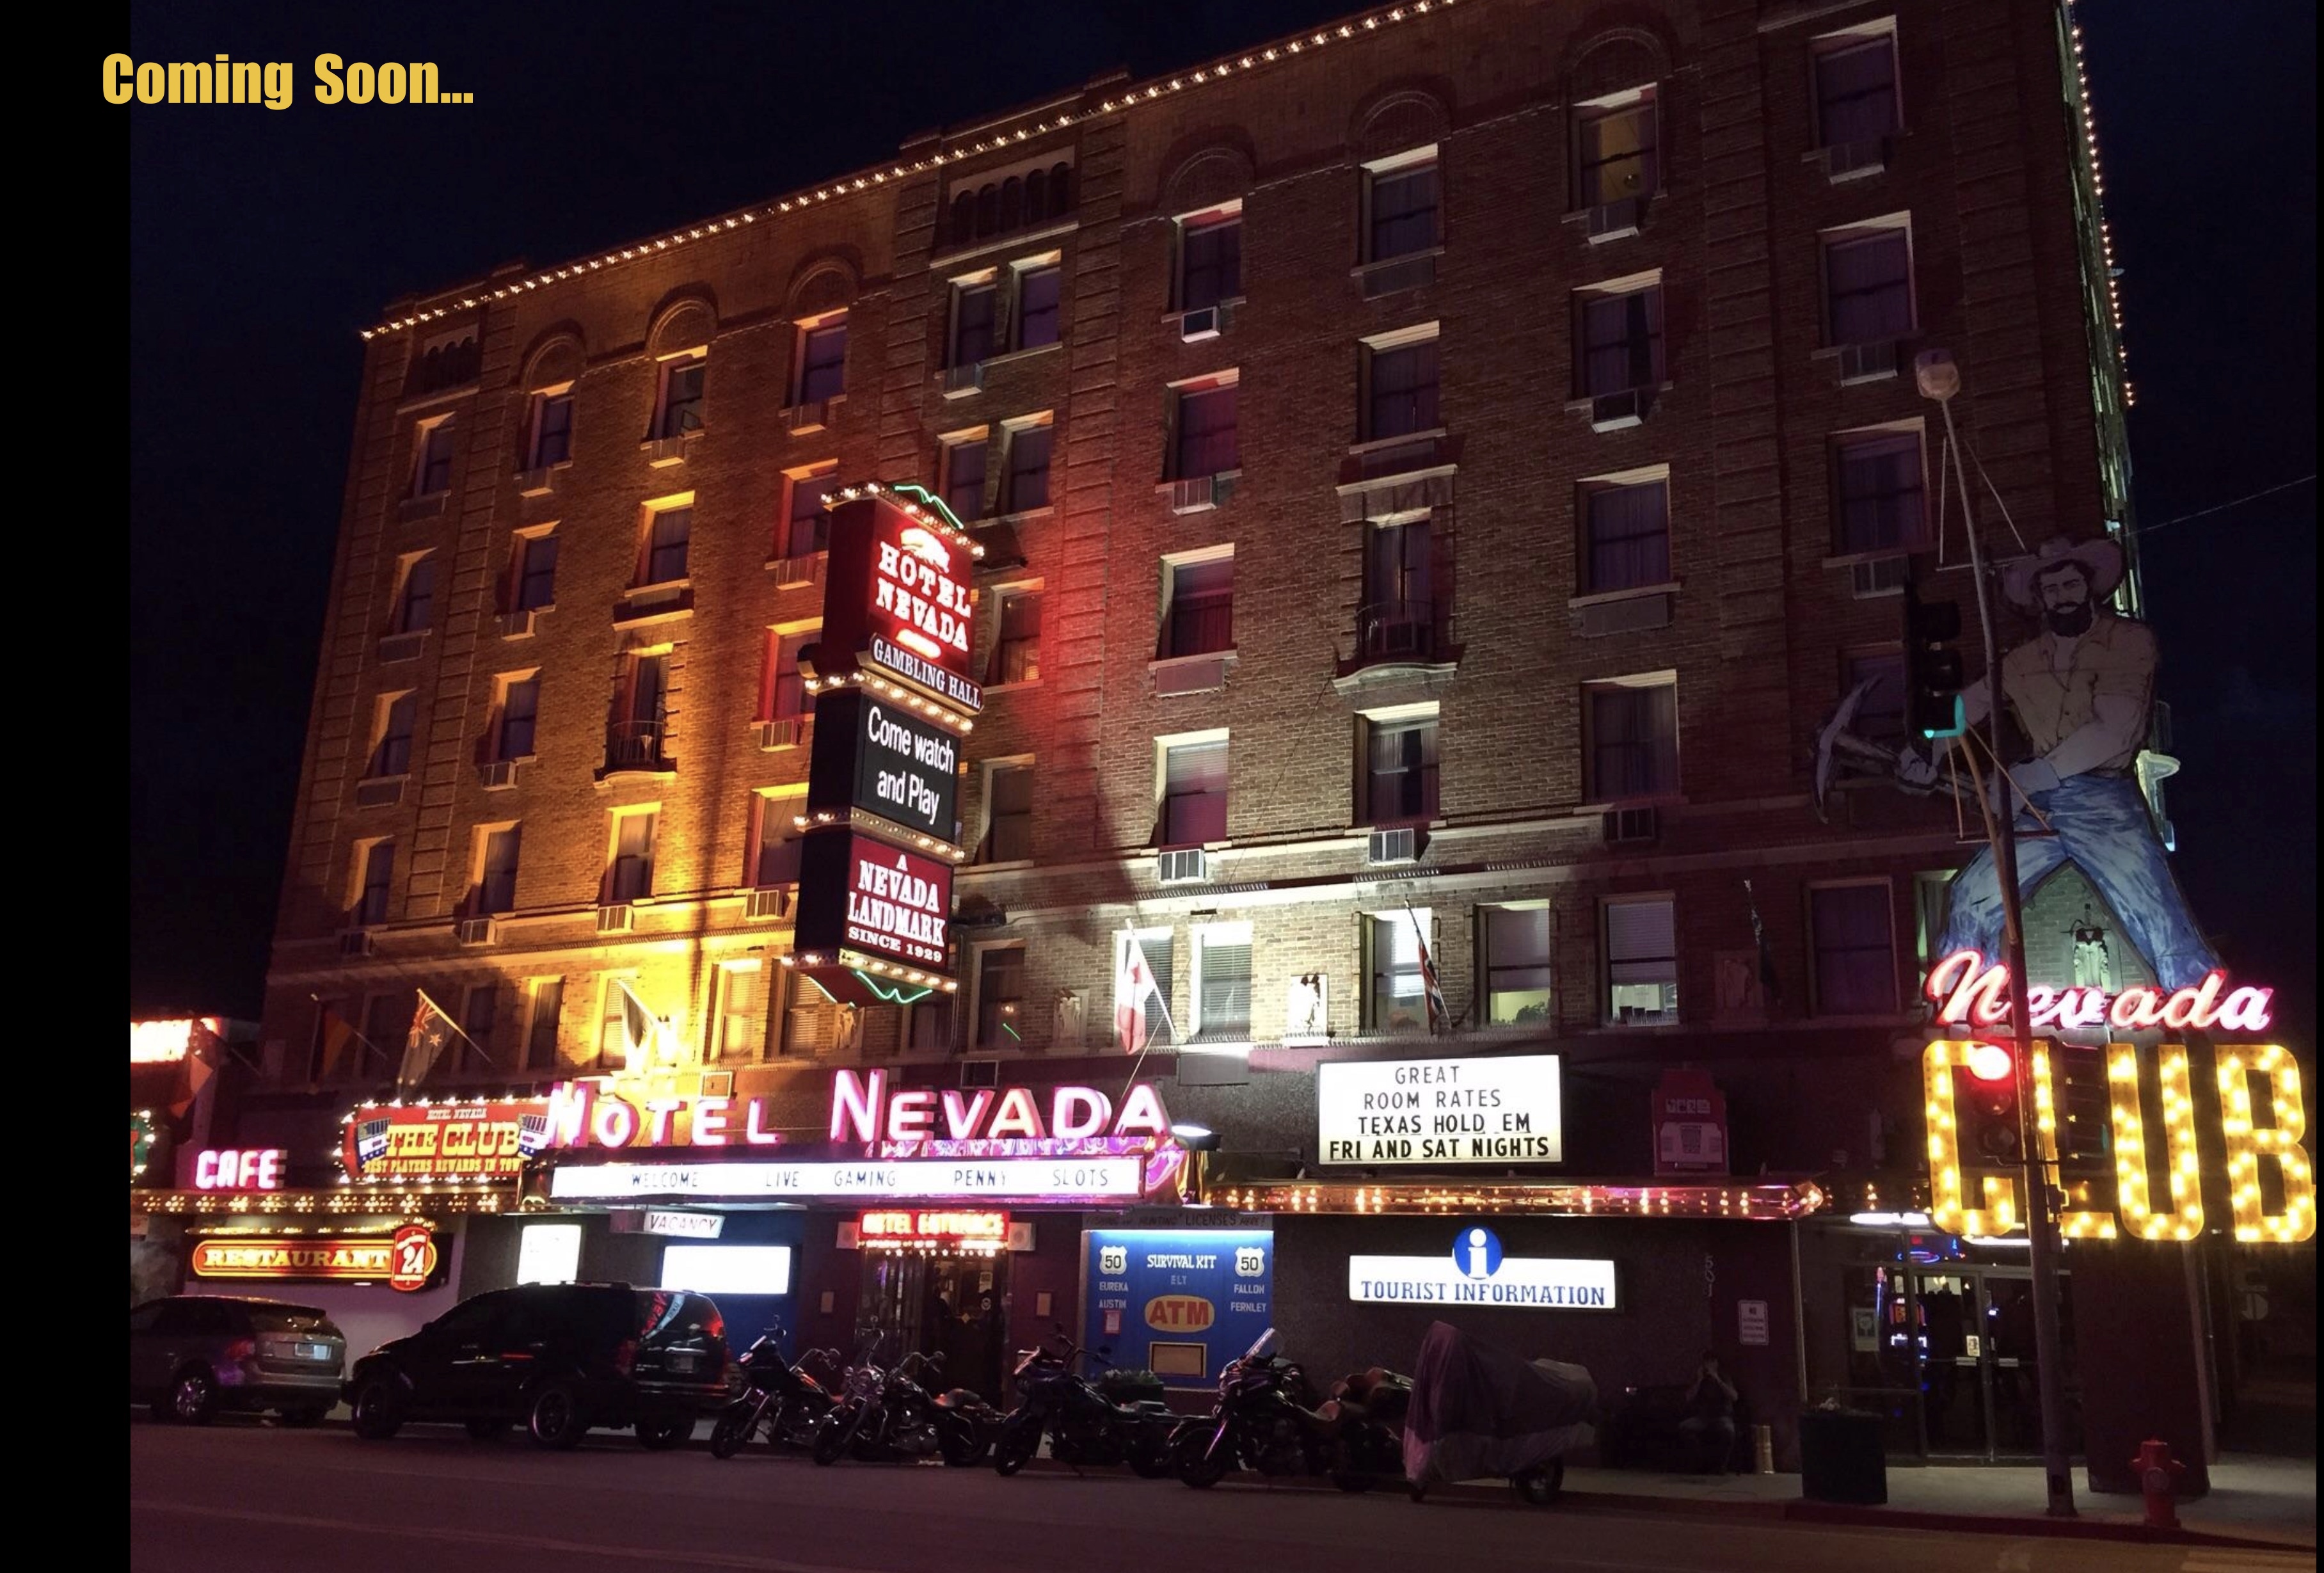 Historic Hotel Nevada & Gambling Hall Cleans Up Their Act…